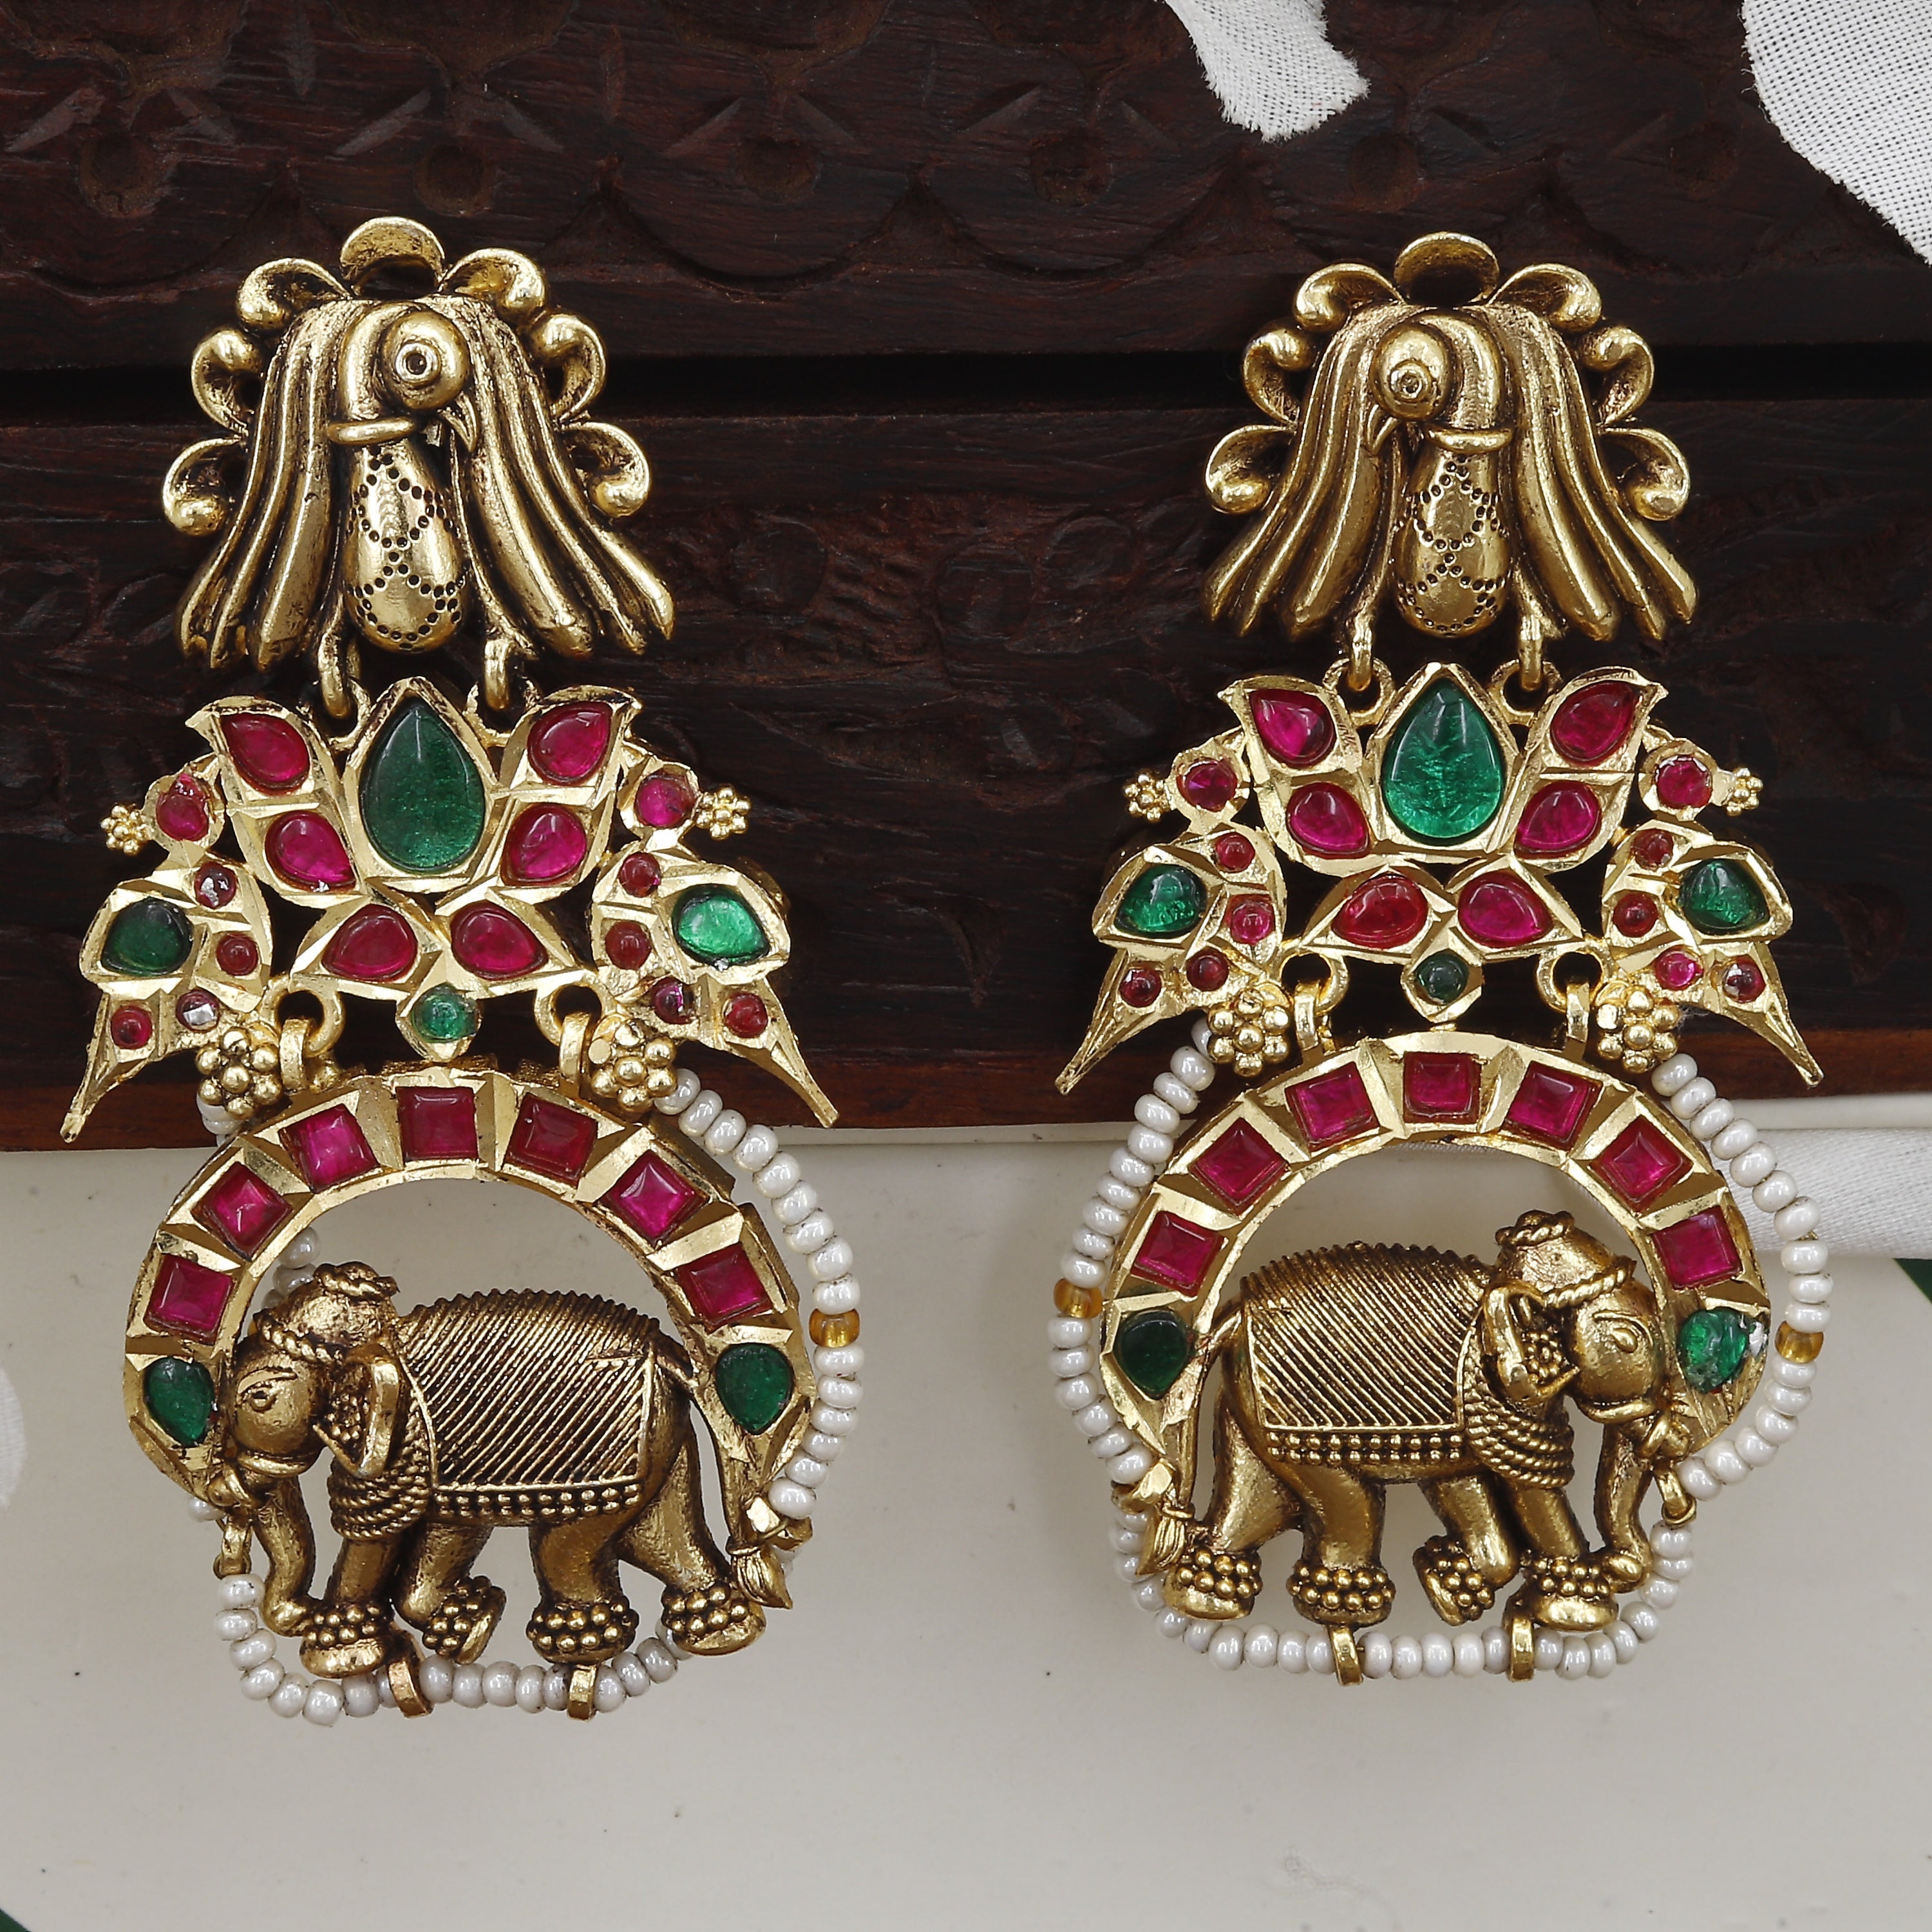 Antique Earrings With Elephant Design